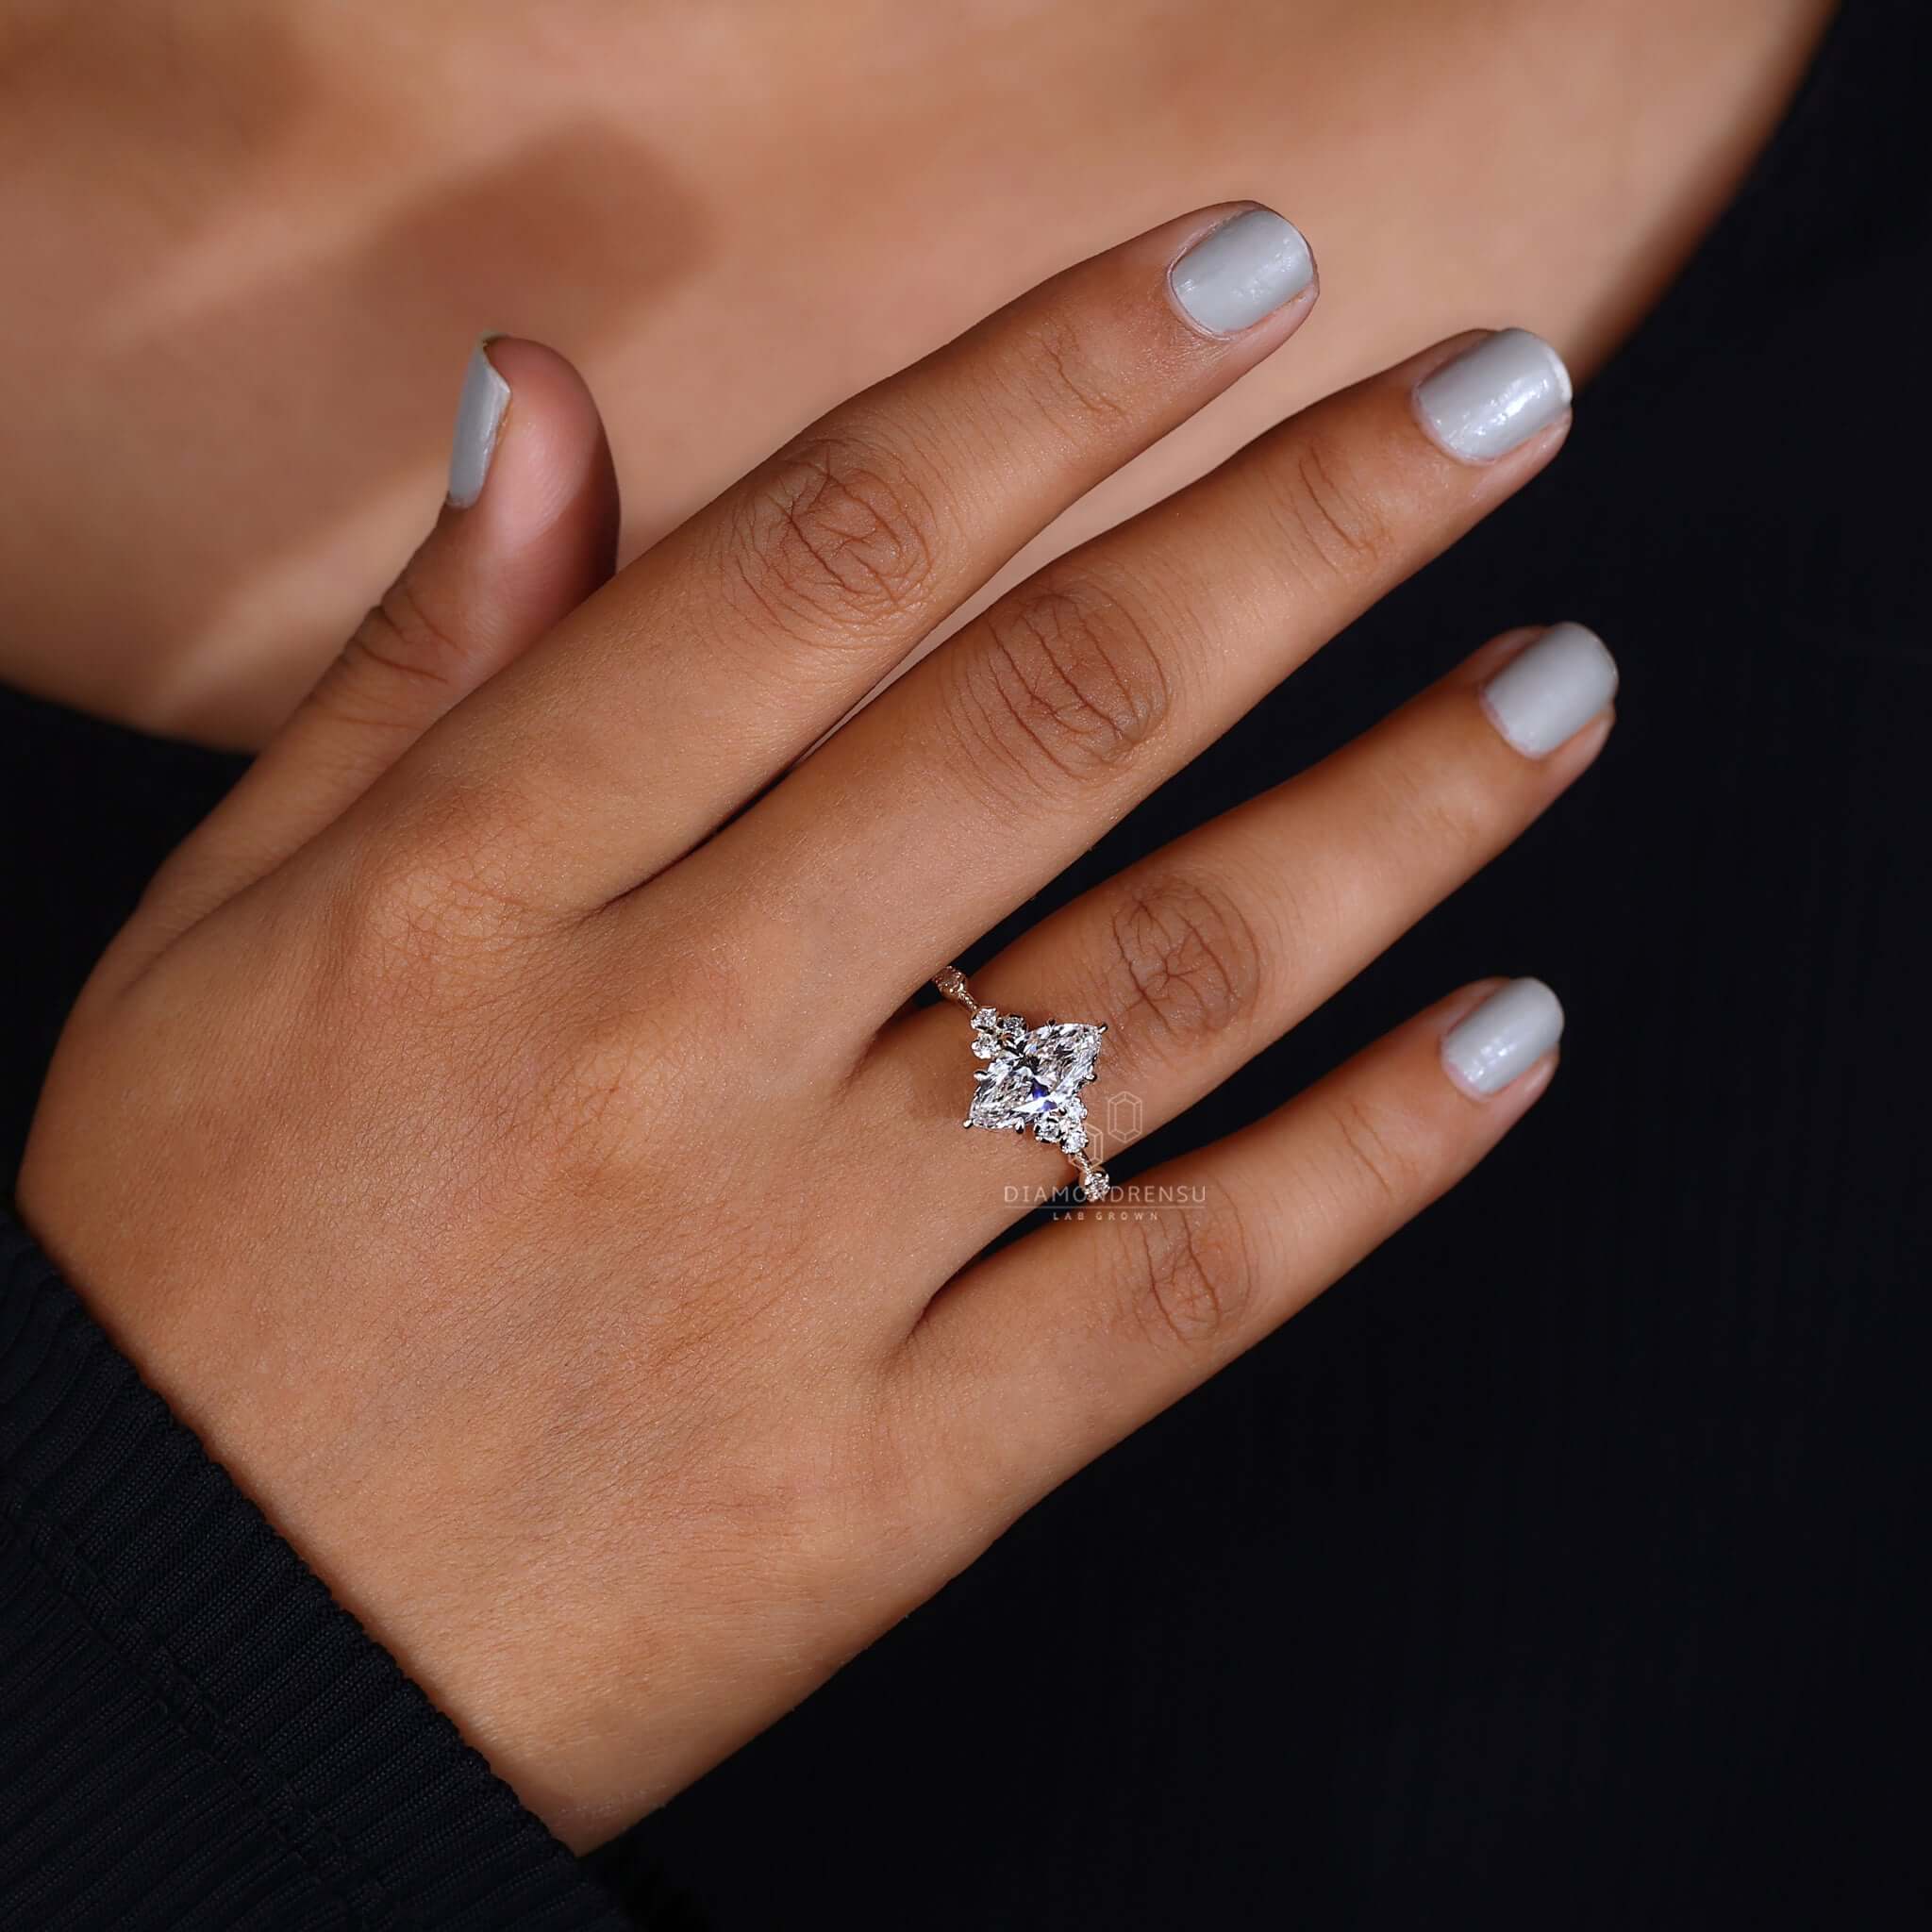 Stunning marquise diamond engagement ring on a hand, capturing the moment of a romantic proposal.